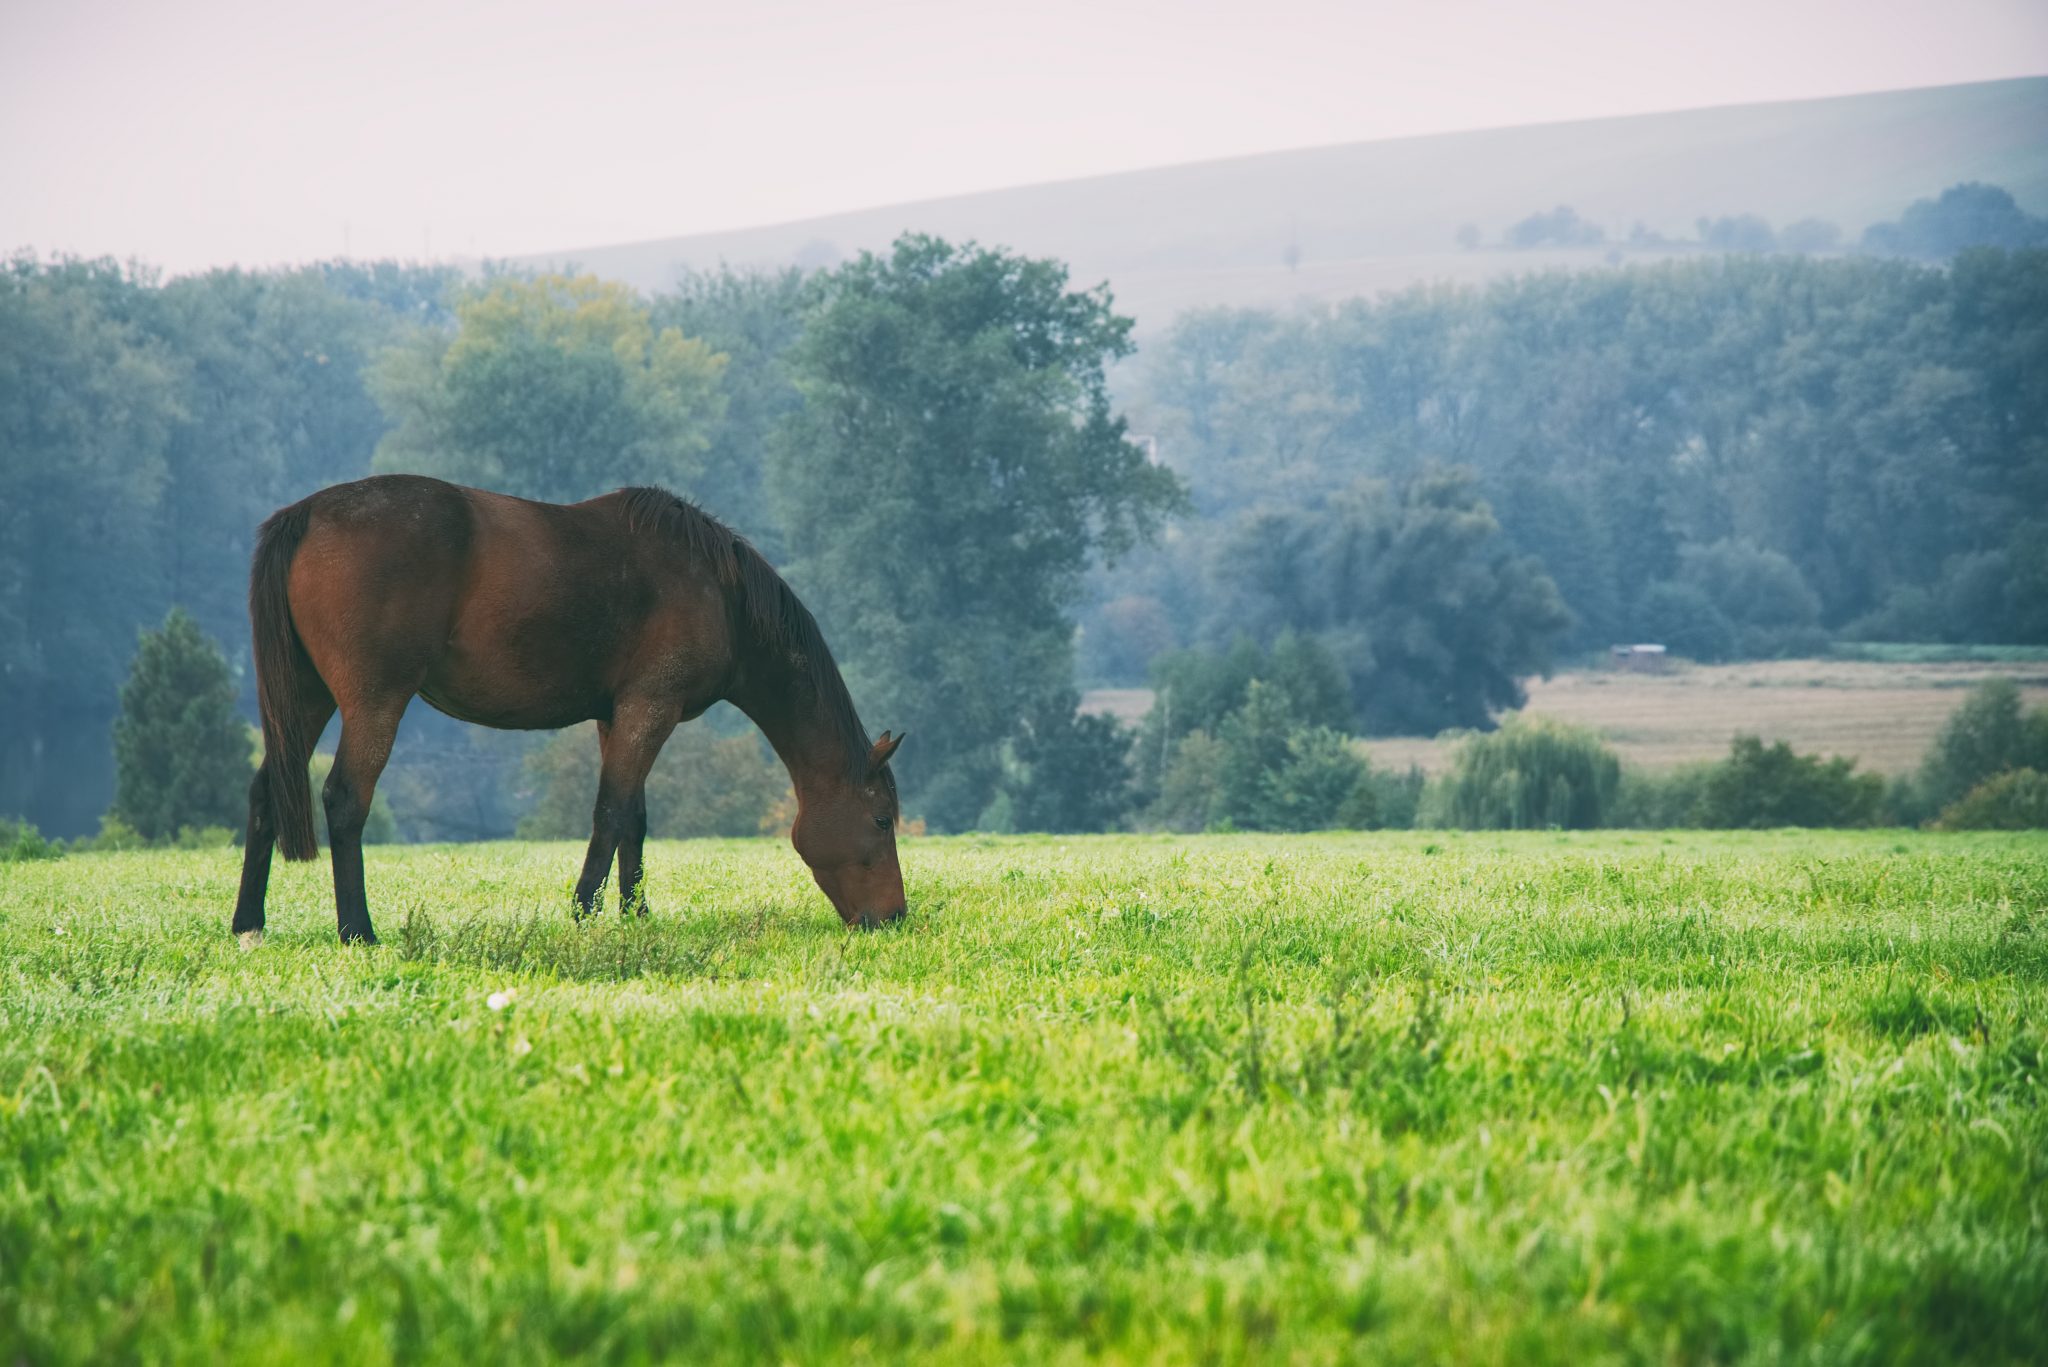 Horse on grazing. English thoroughbred in the enclosure at farmland